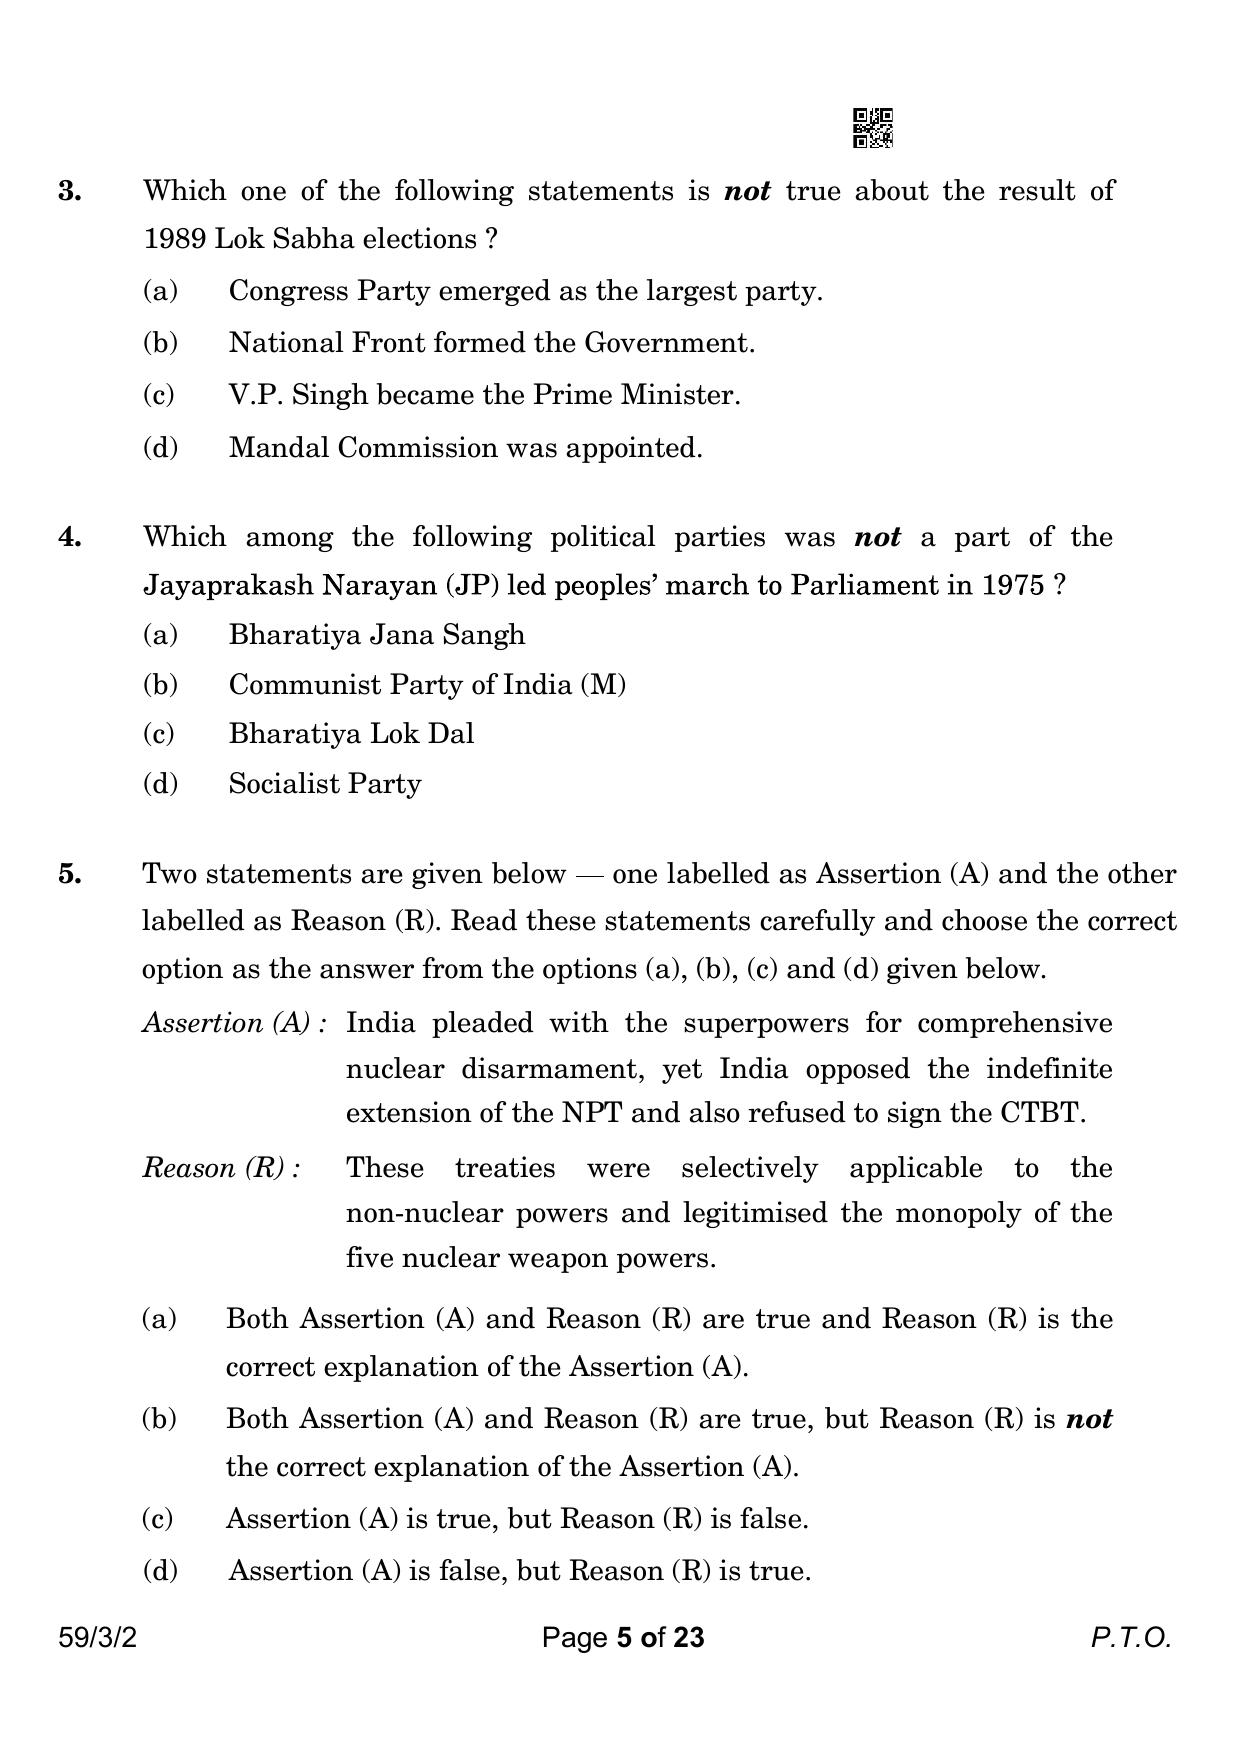 CBSE Class 12 59-3-2 Political Science 2023 Question Paper - Page 5